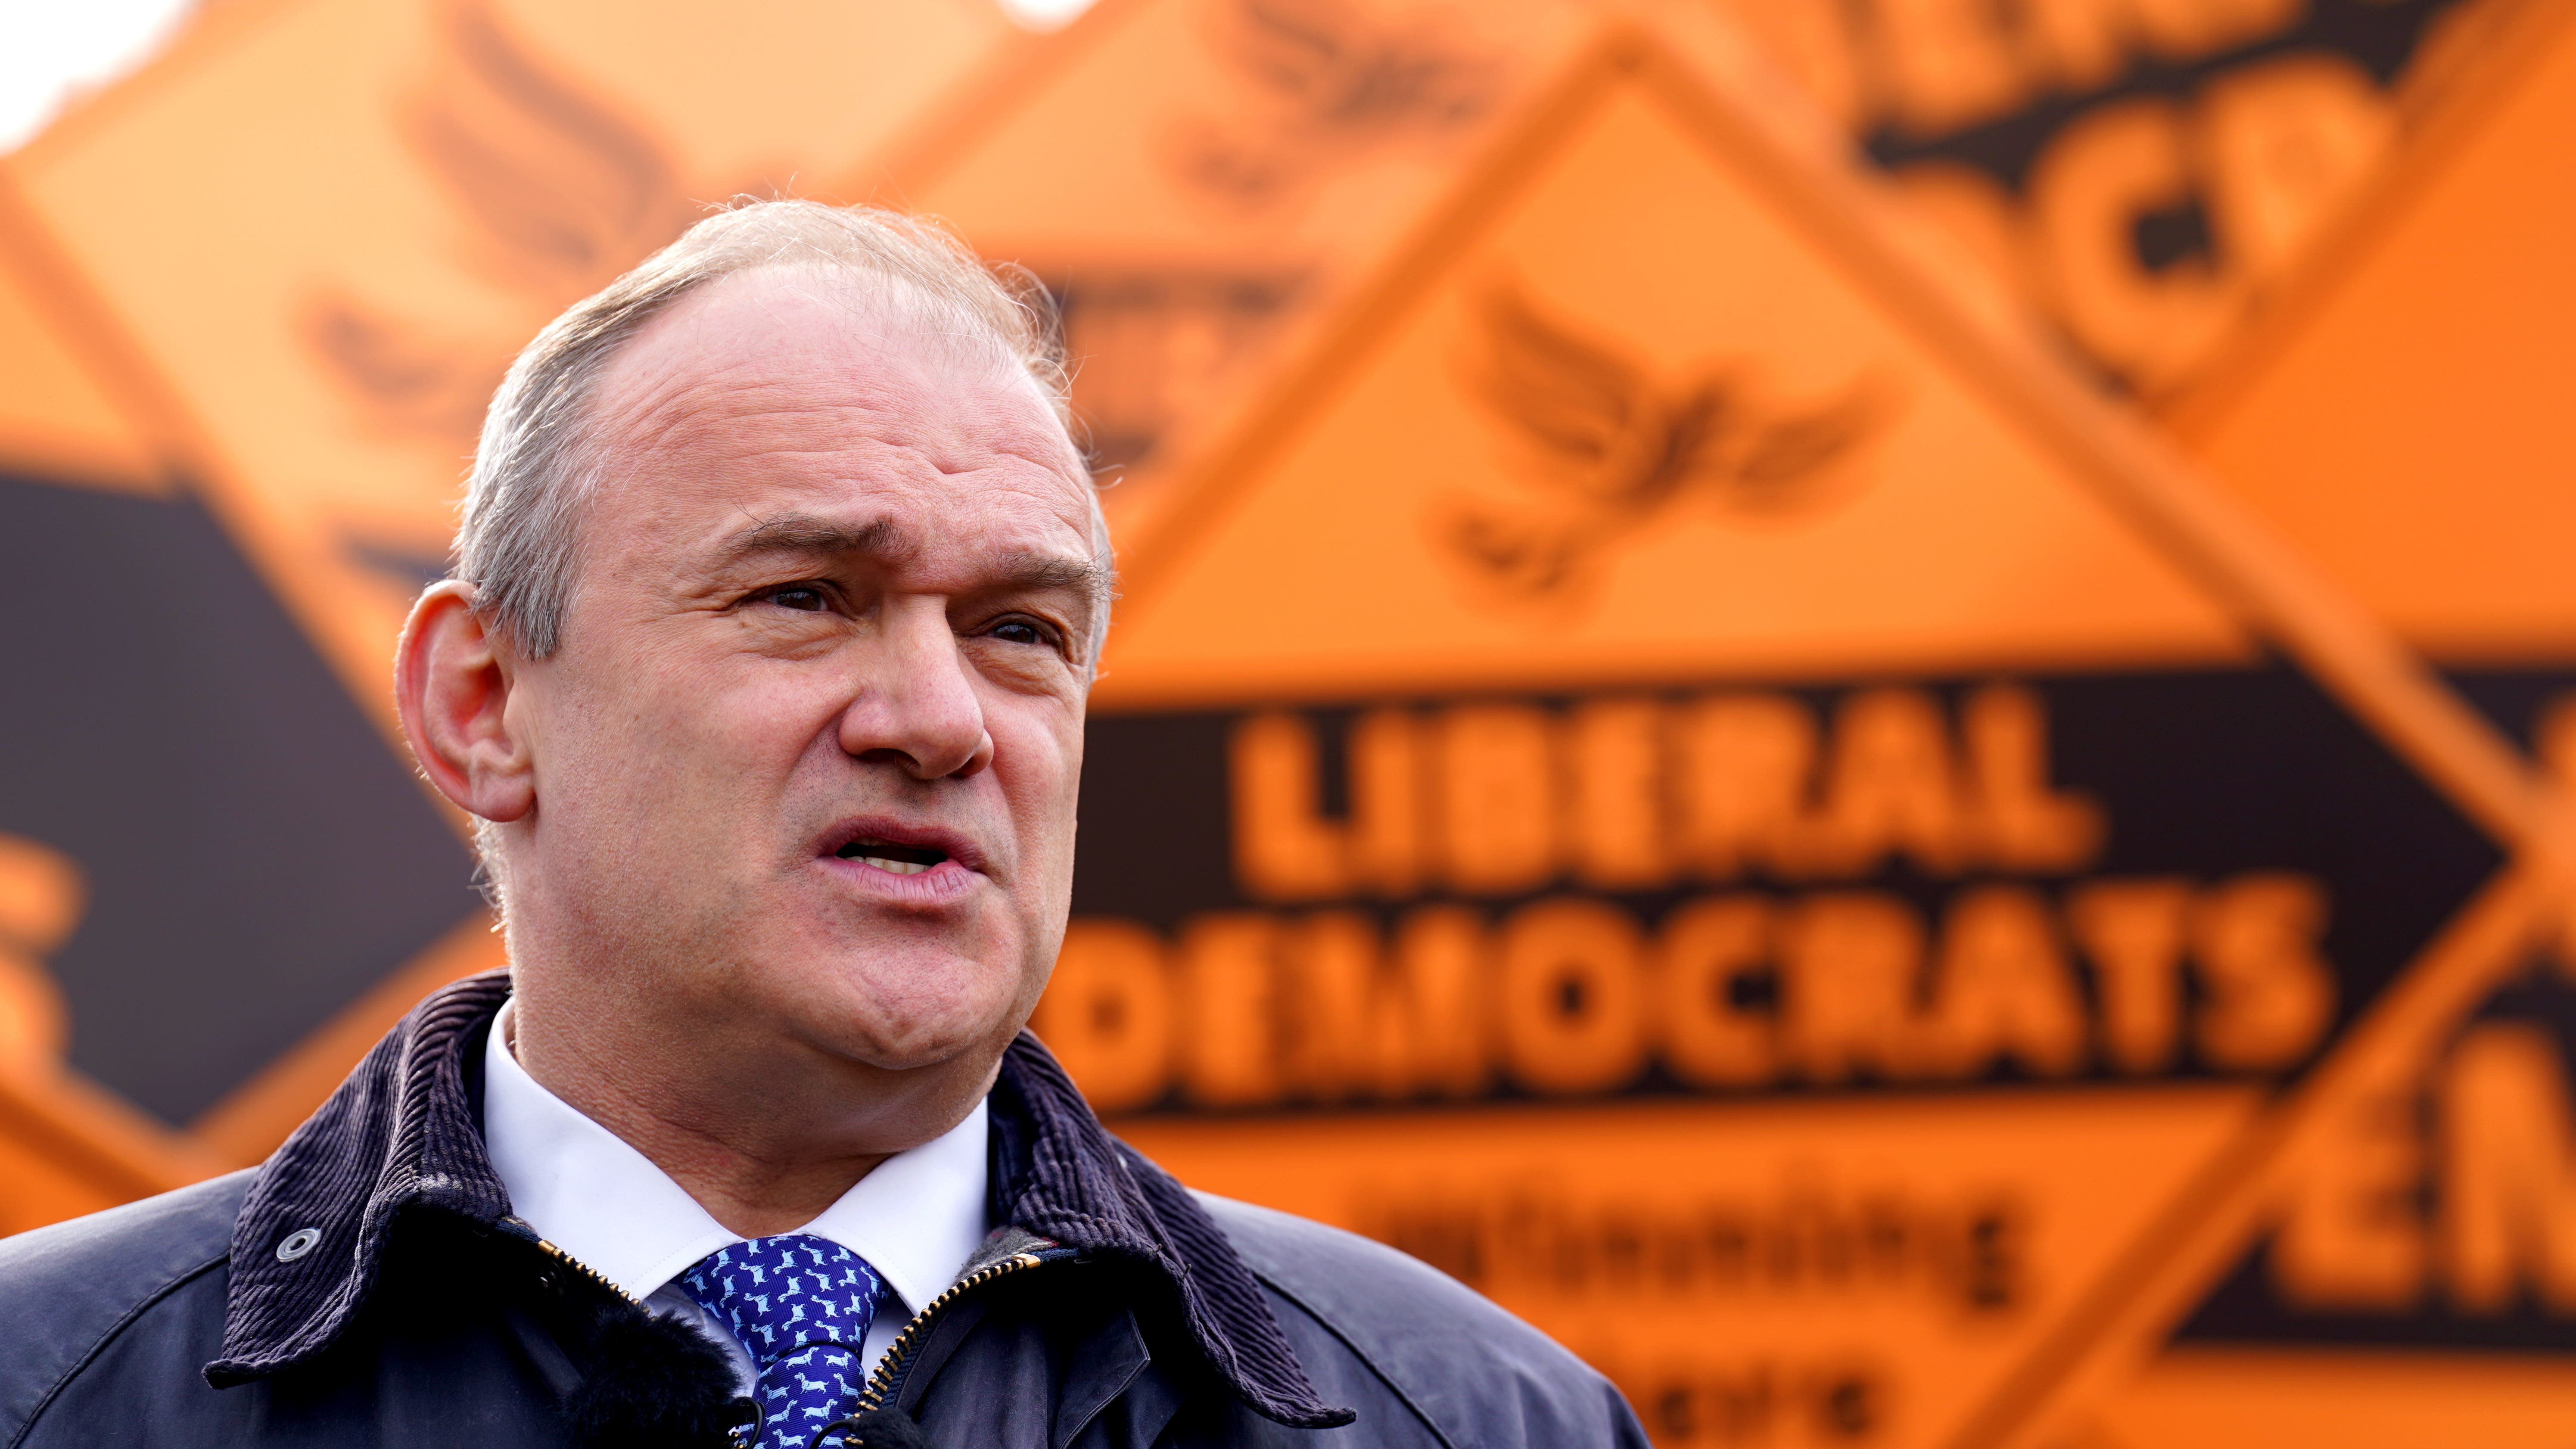 Sir Ed Davey: The leader hoping to end the Lib Dem wilderness years